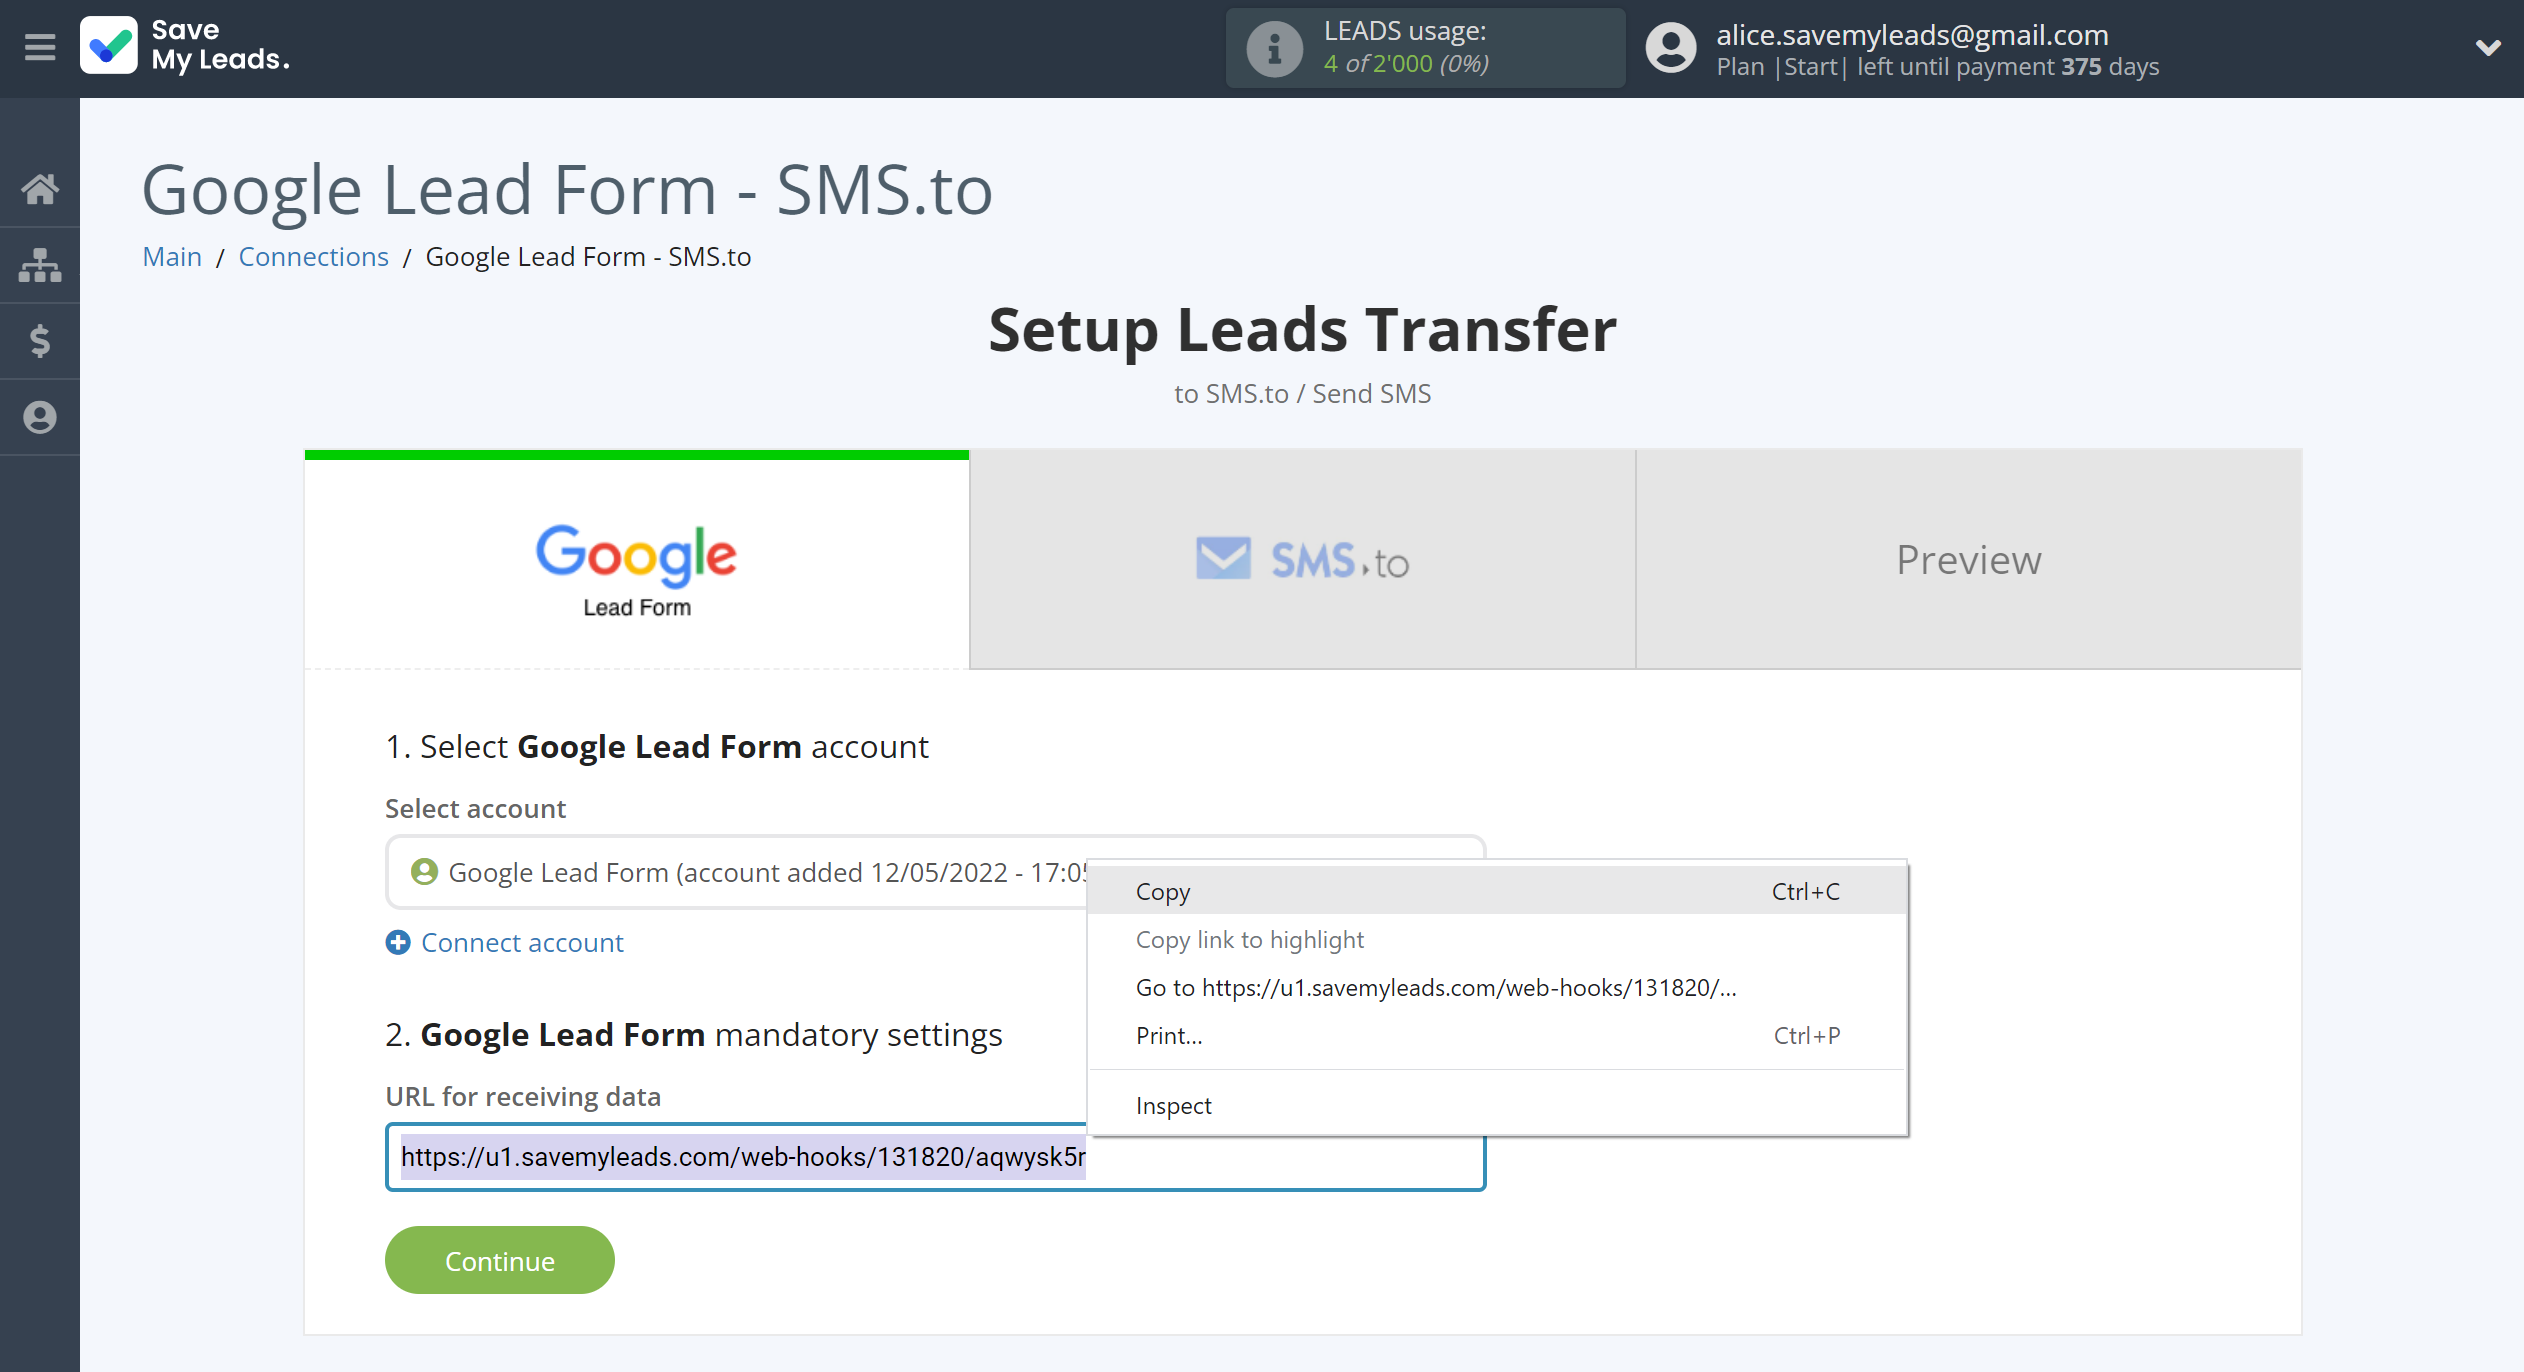 How to Connect Google Lead Form with SMS.to | Data Source account connection